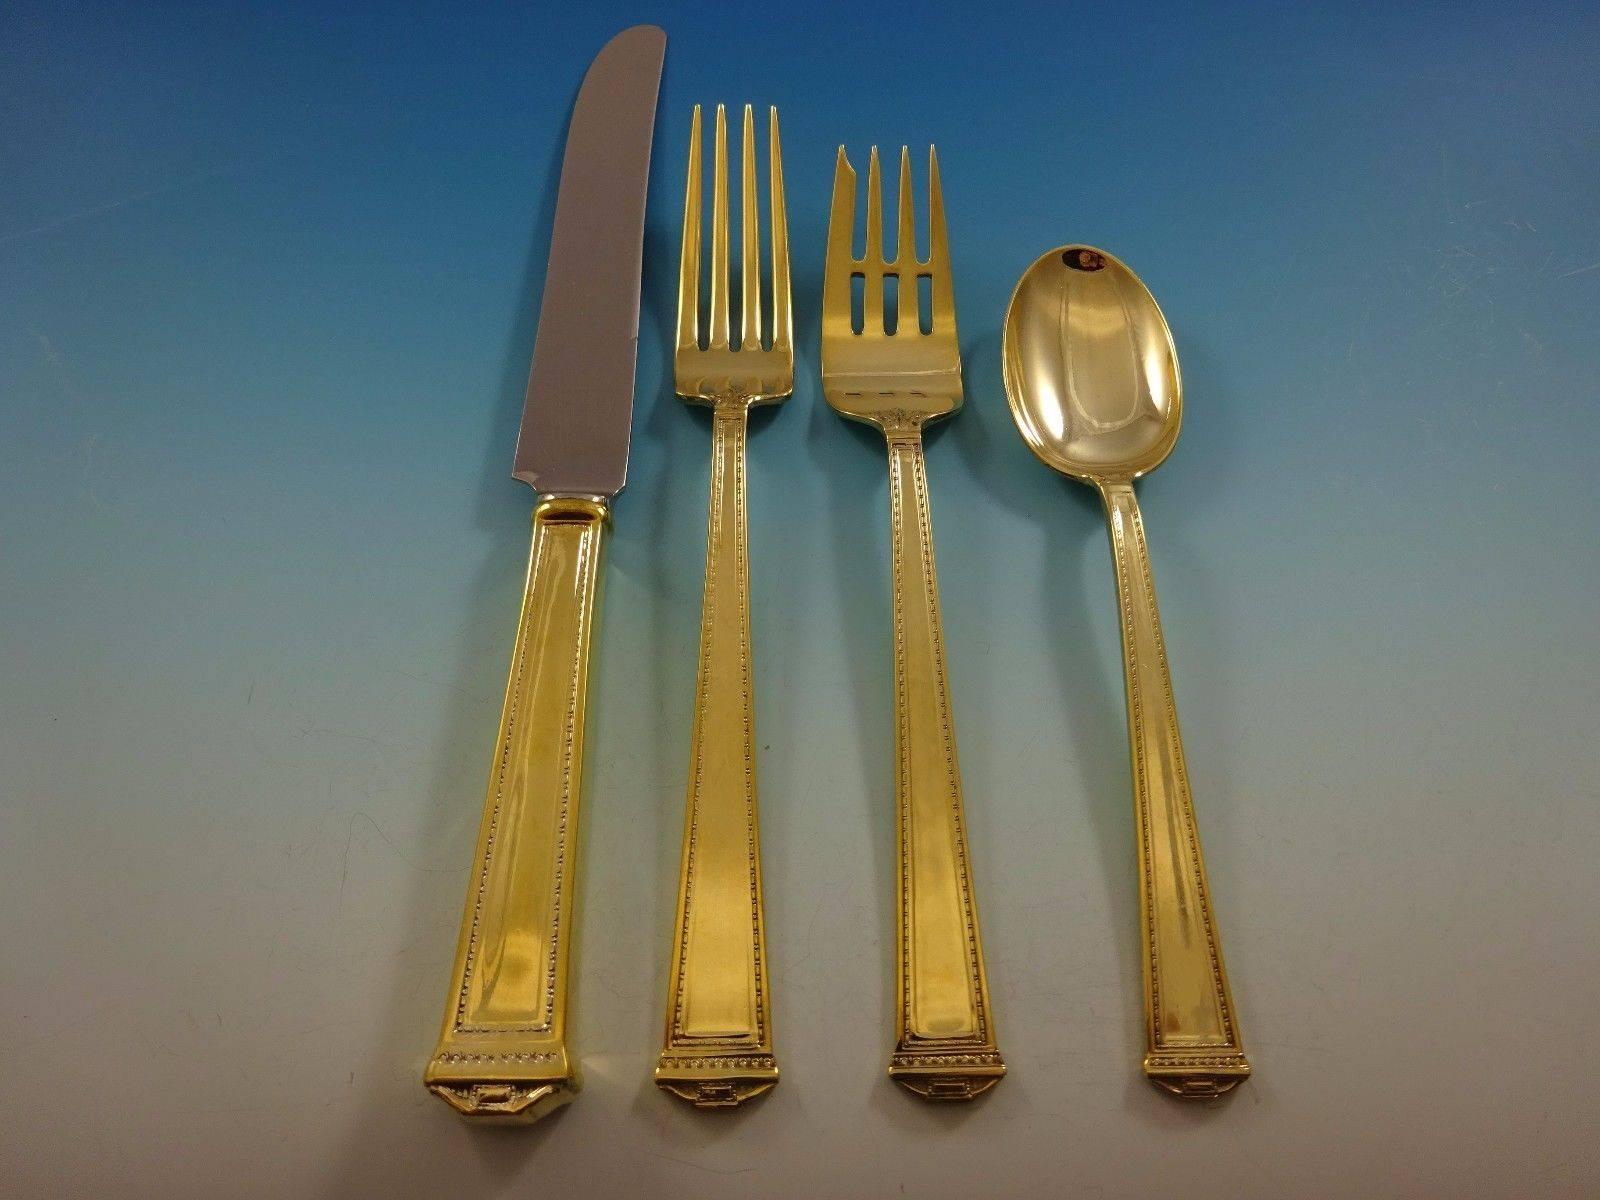 Beautiful Pantheon Gold by International Sterling Silver flatware set - 24 pieces. This set is vermeil (completely gold-washed) and includes: 

6 Knives, 9 1/8